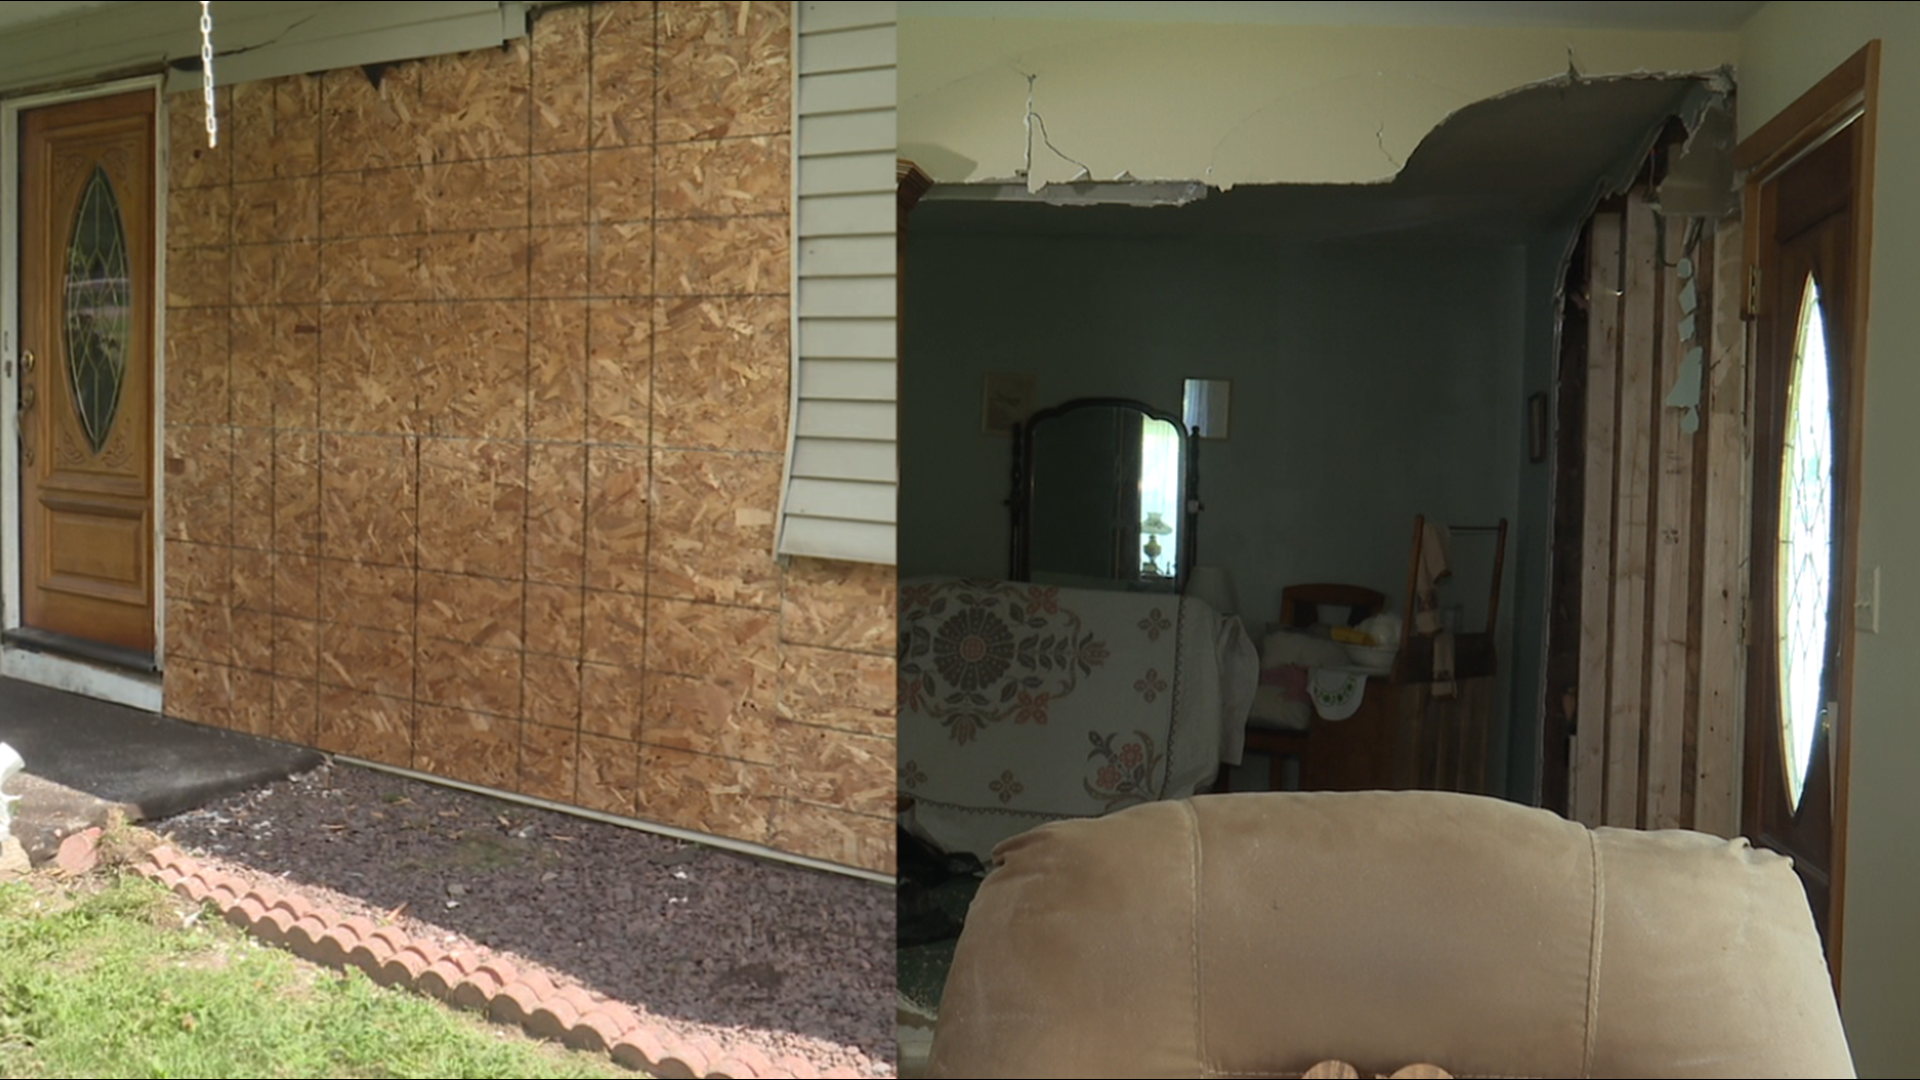 Newswatch 16's Rose Itzcovitz talked to the woman who now has a gaping hole in her house and no idea about who's responsible.